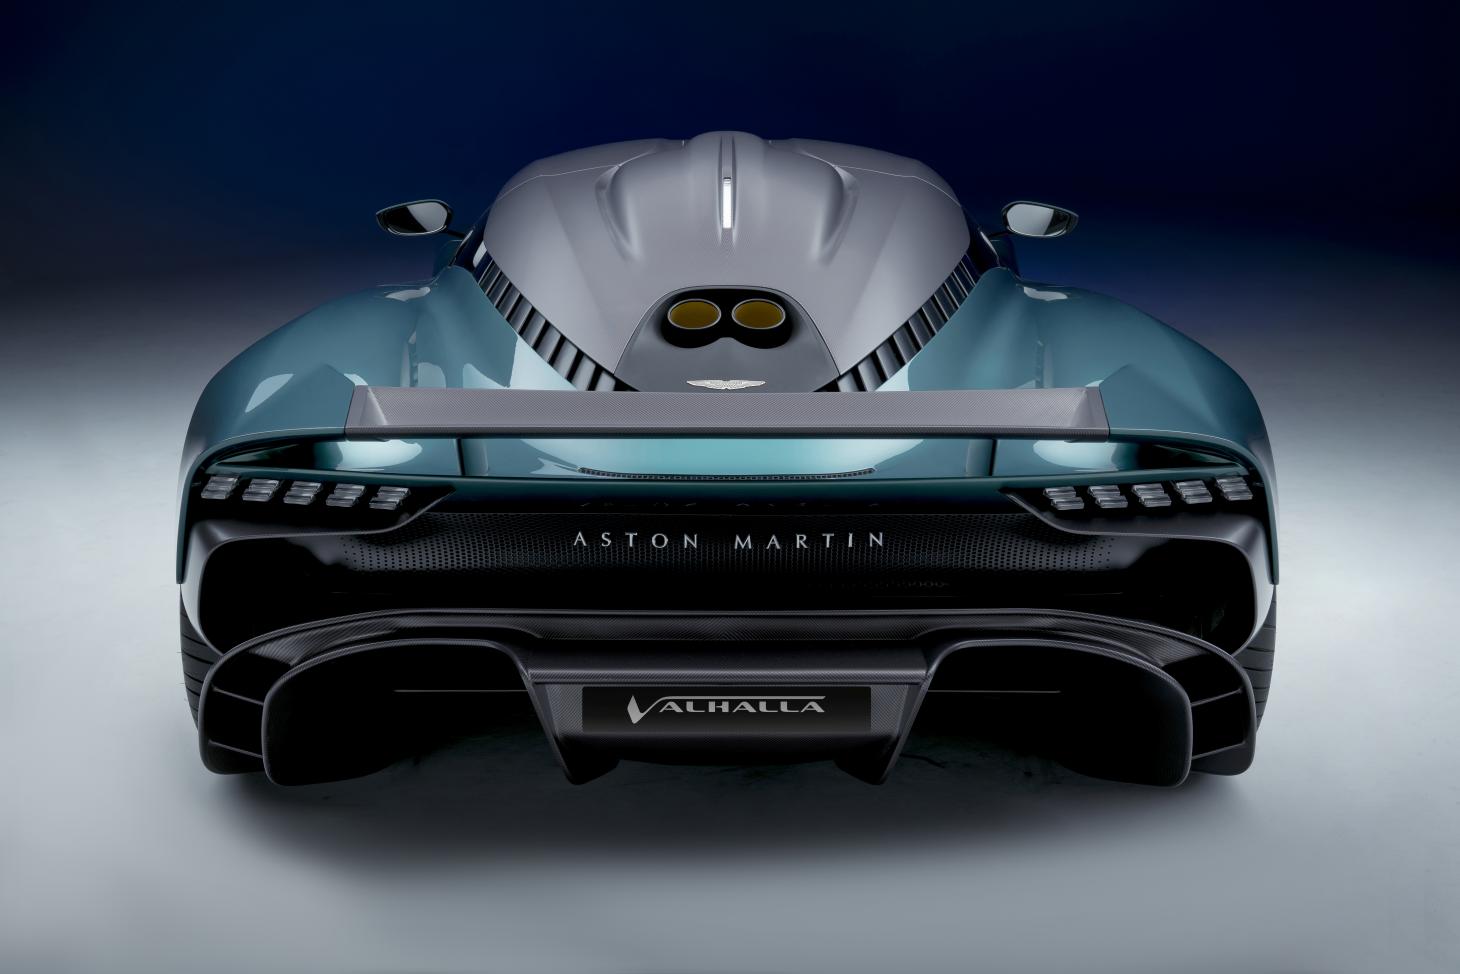 Aston Martin Am-Rb 003 Concept Wallpapers